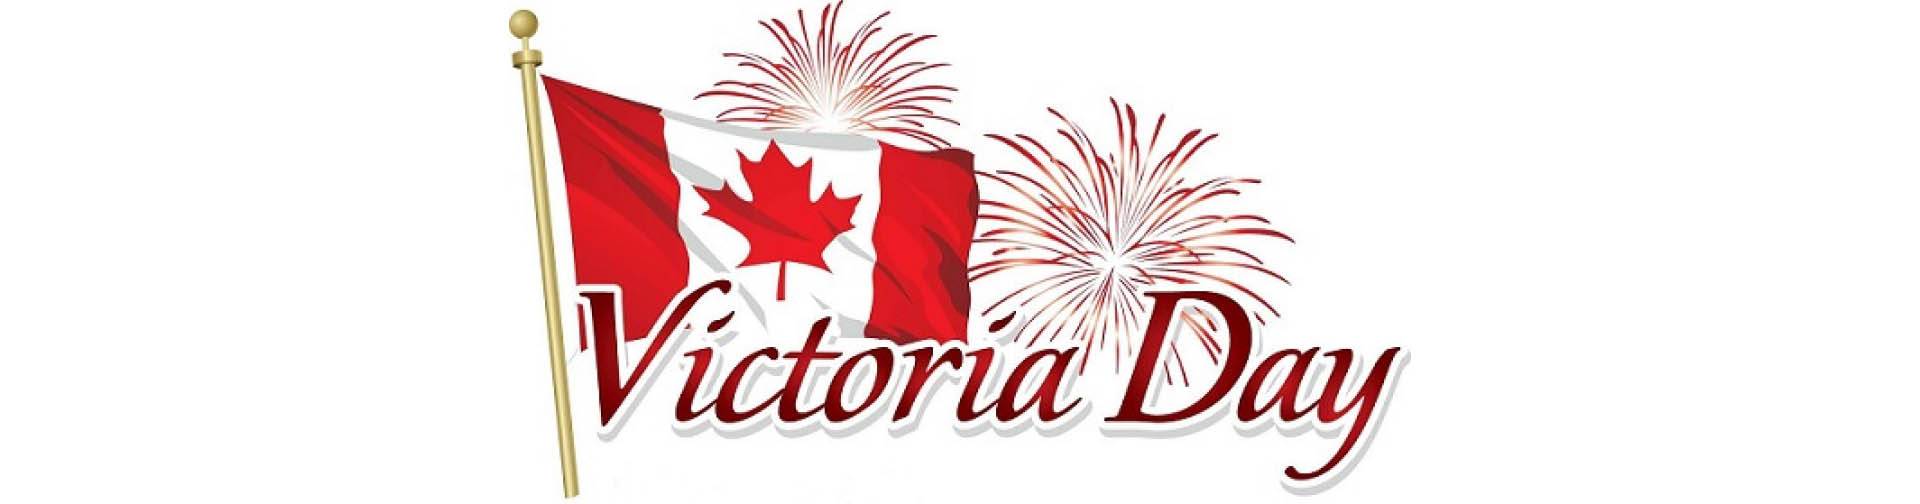 Victoria Day Weekend Hours Rempel Insurance Brokers Ltd. » Rempel